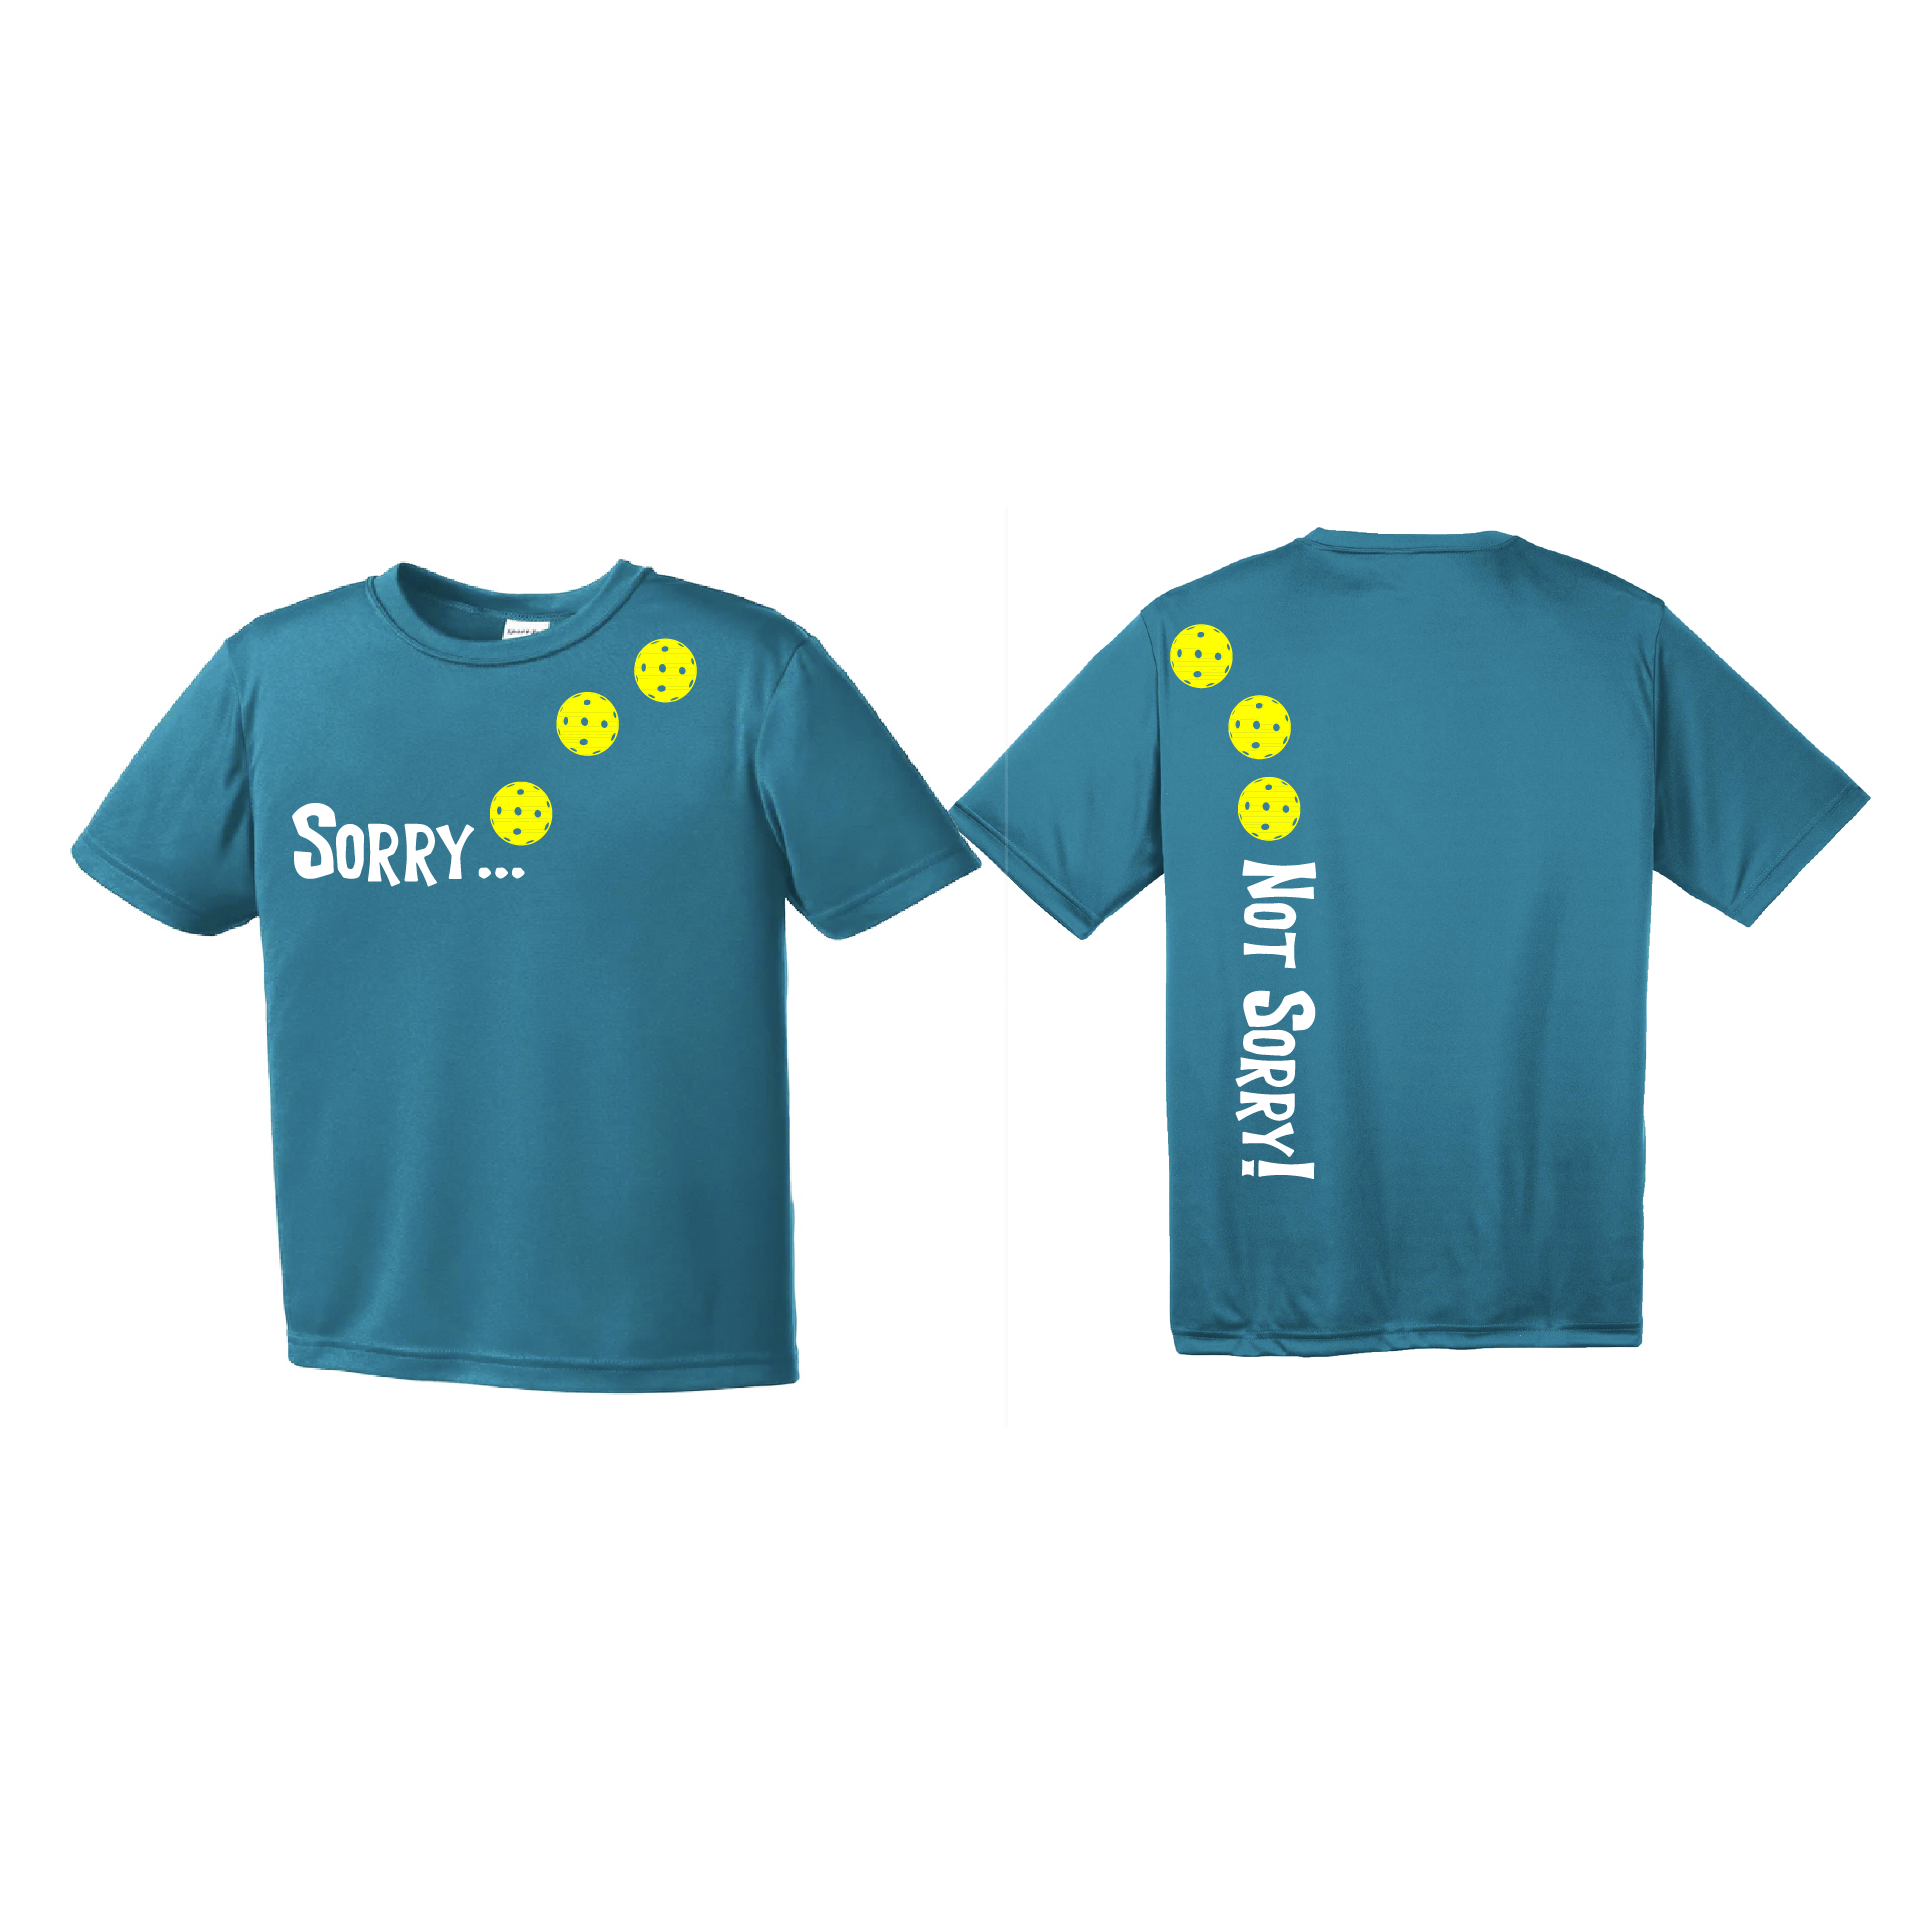 Pickleball Design: Sorry... Not Sorry - Customizable Ball Color - Choose: Yellow, White or Green.   Youth Styles: Short Sleeve  Shirts are lightweight, roomy and highly breathable. These moisture-wicking shirts are designed for athletic performance. They feature PosiCharge technology to lock in color and prevent logos from fading. Removable tag and set-in sleeves for comfort.